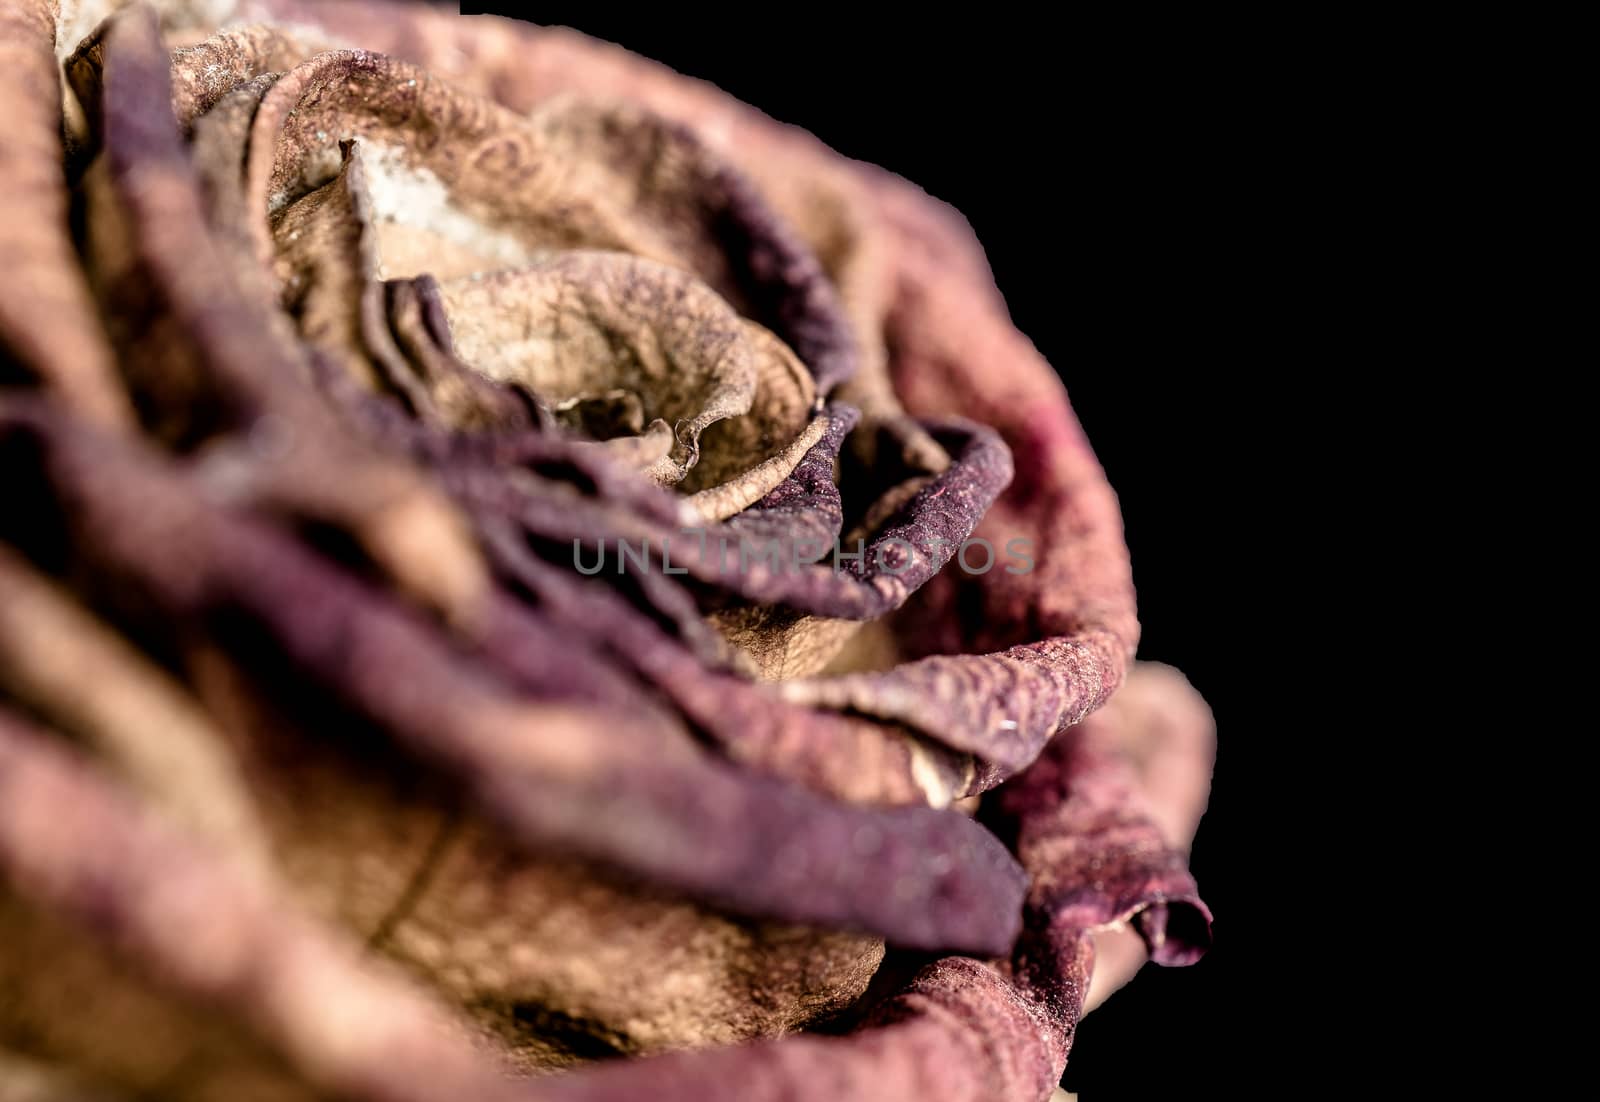 Faded and withered blossom of a rose, symbol for grief, fear and by geogif